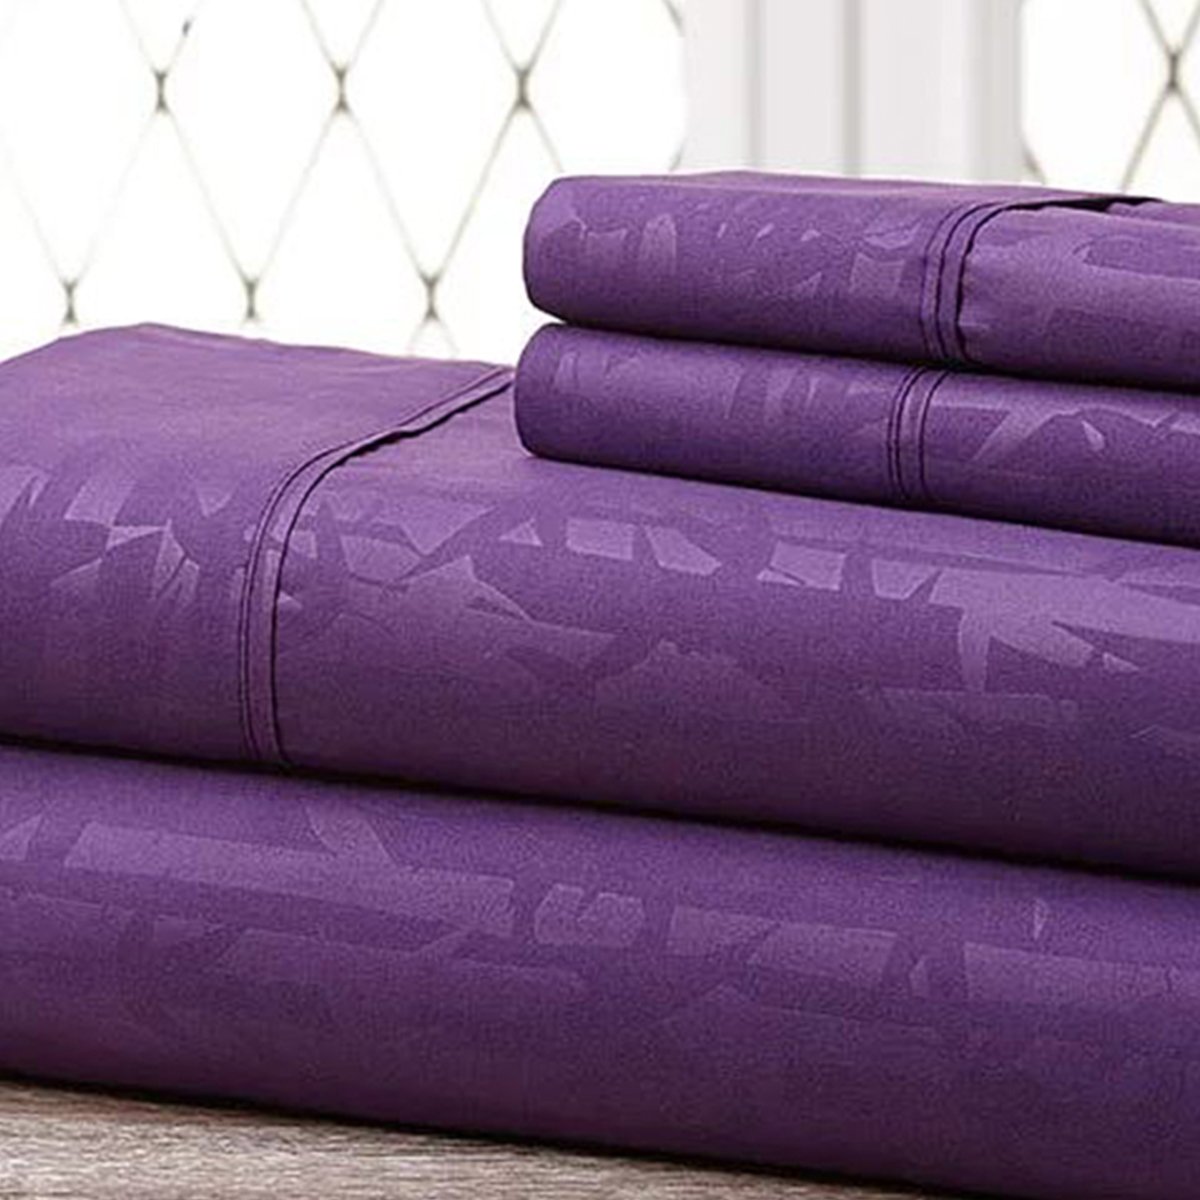 Hny-4pc-eb-pur-f Super-soft 1600 Series Bamboo Embossed Bed Sheet, Purple - Full, 4 Piece